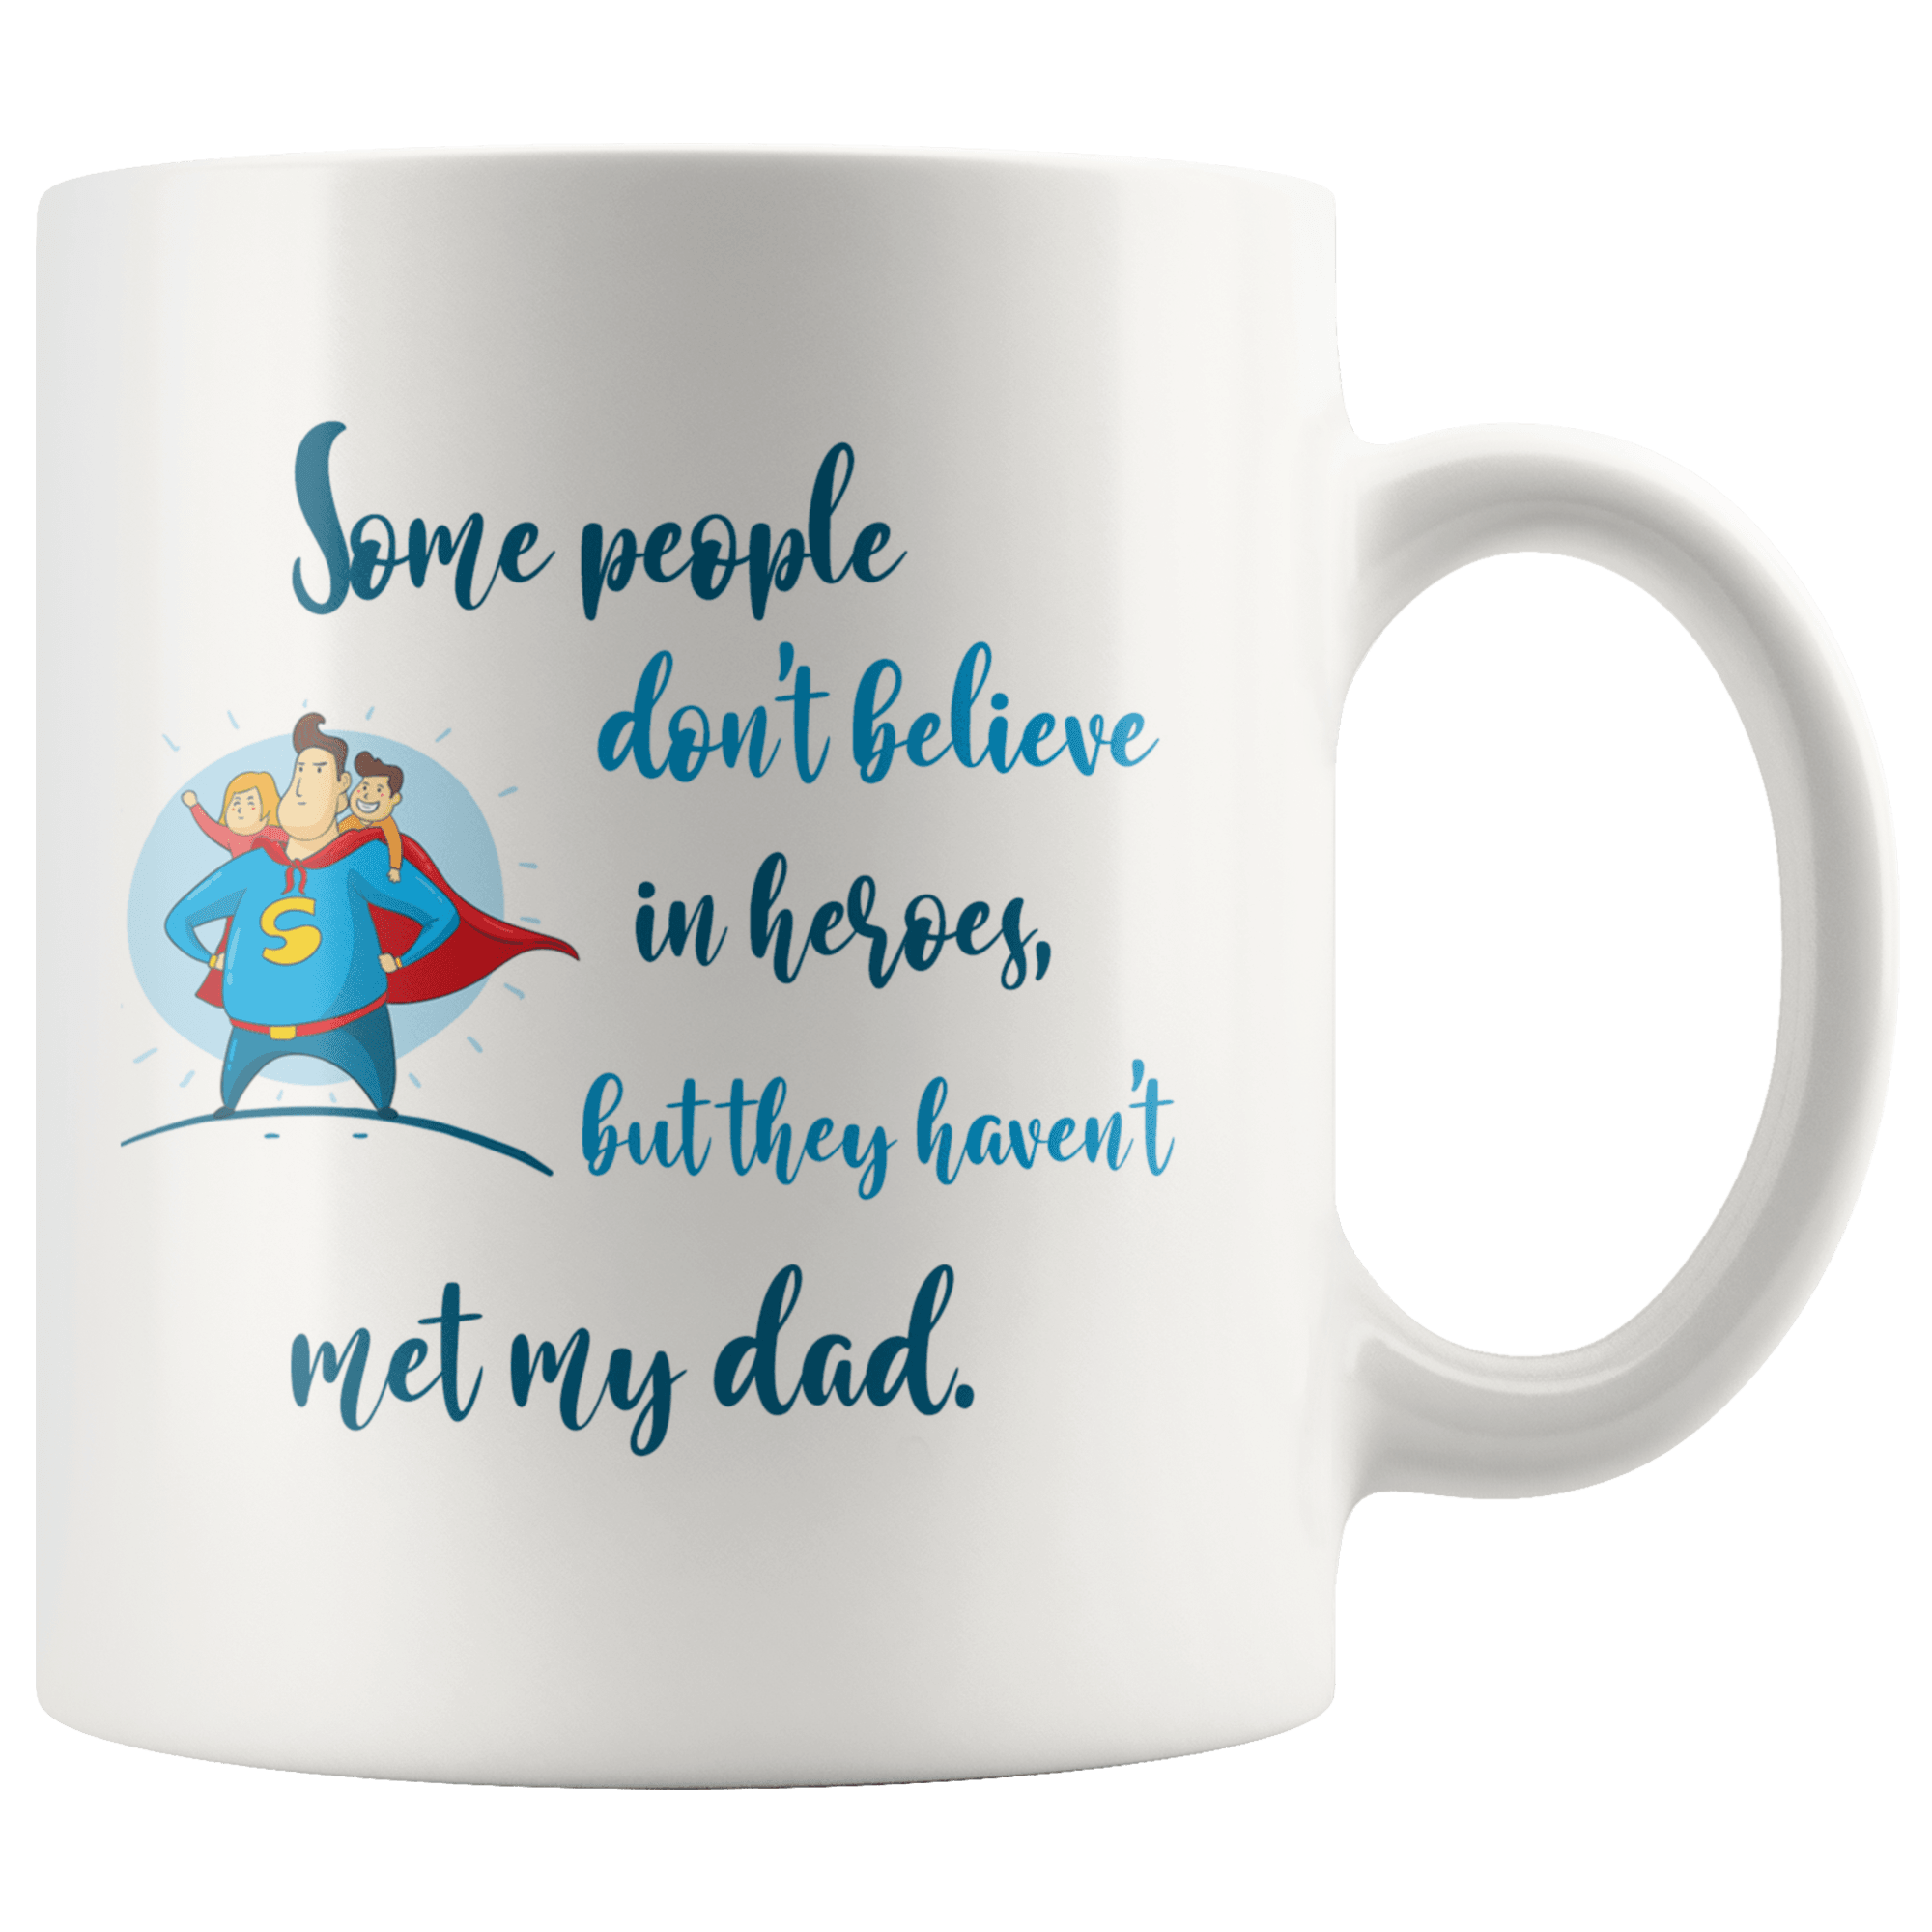 Great Coffee Mug For Father - Some People Don't Believe In Heroes, But They Haven't Met My Dad - SPCM